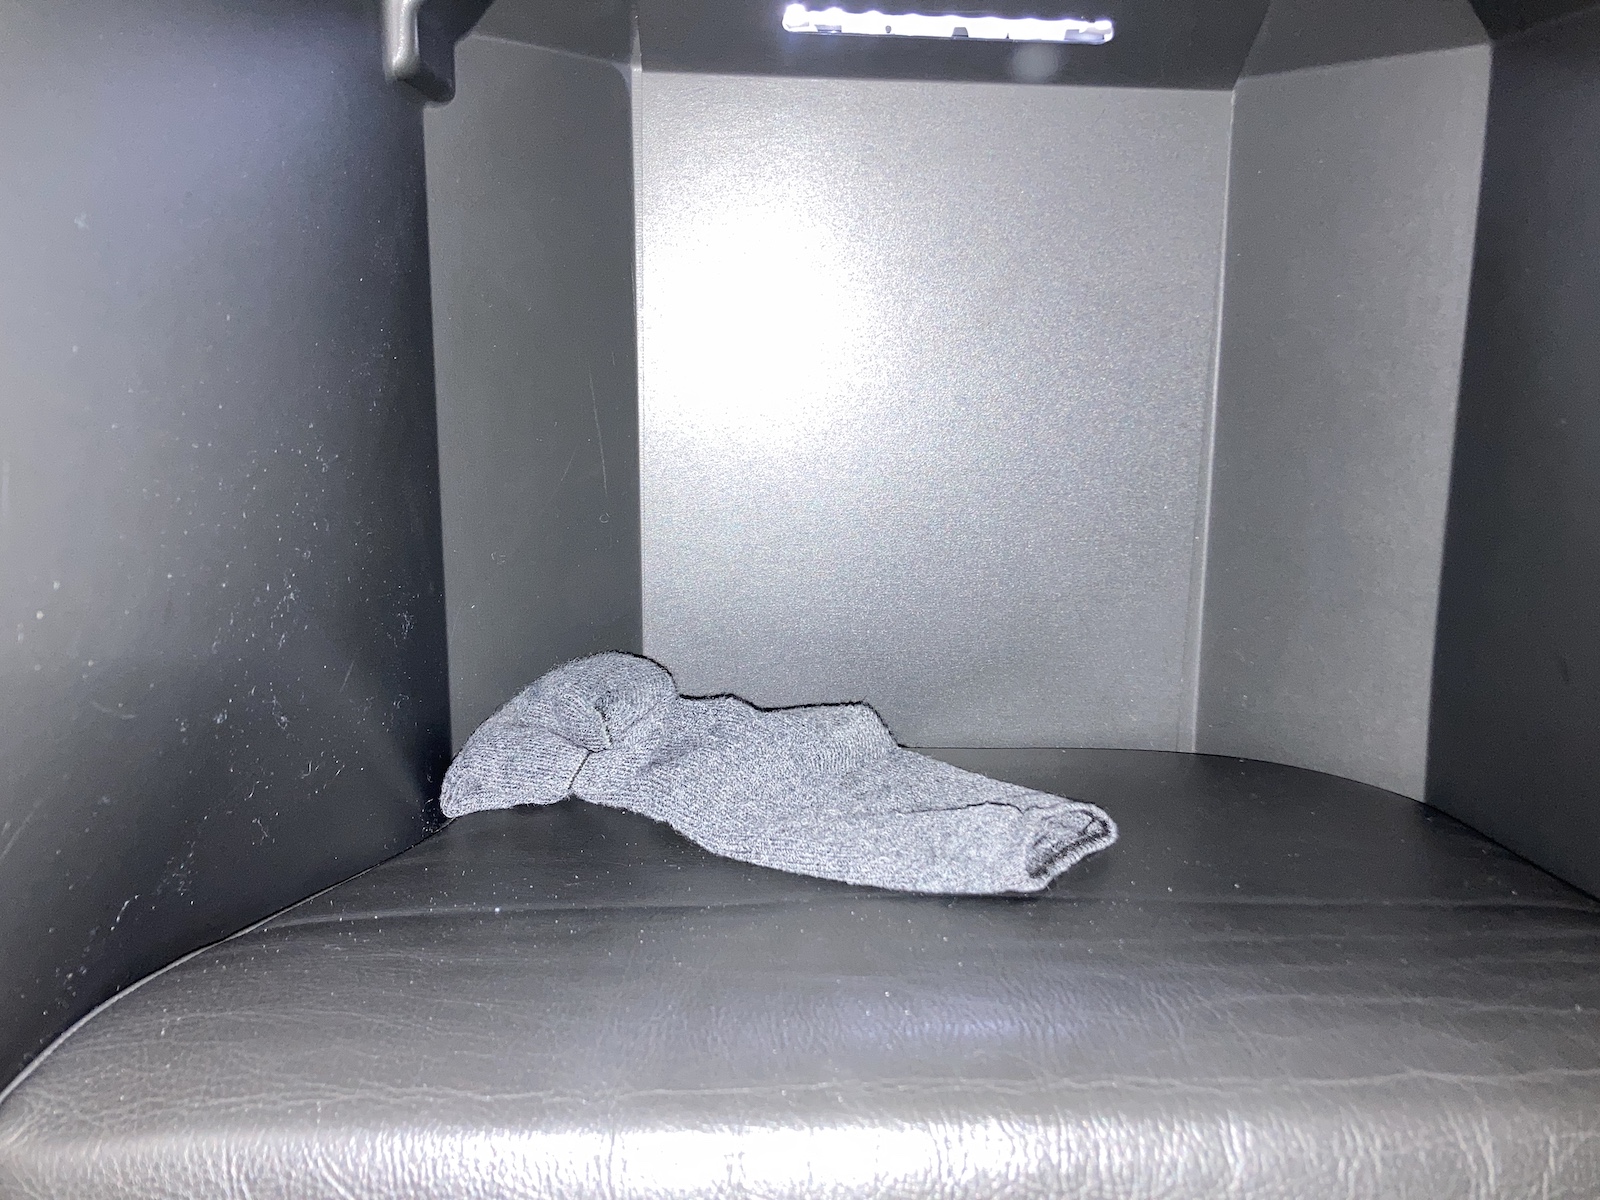 Image of dirty sock left behind in business class seat, another reason my SAS review is negative.